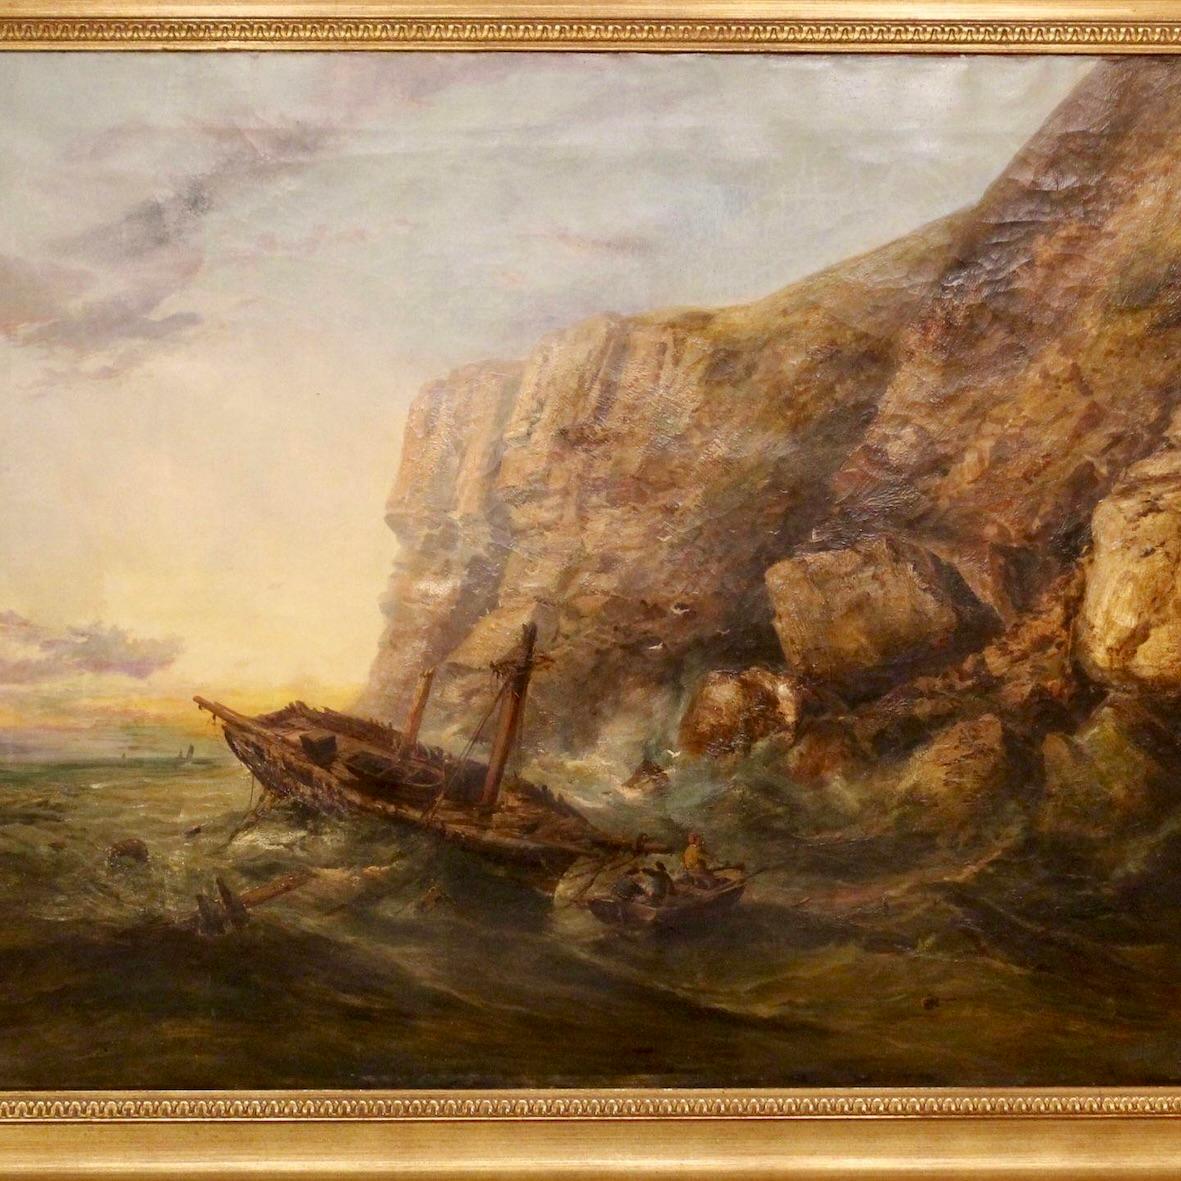 A dramatic seascape by the talented 19th century English artist Ralph Reuben Stubbs (1825-1879), known for his landscape paintings depicting the natural and wild beauty of his native Yorkshire coast as well as local inland scenes, conveyed in